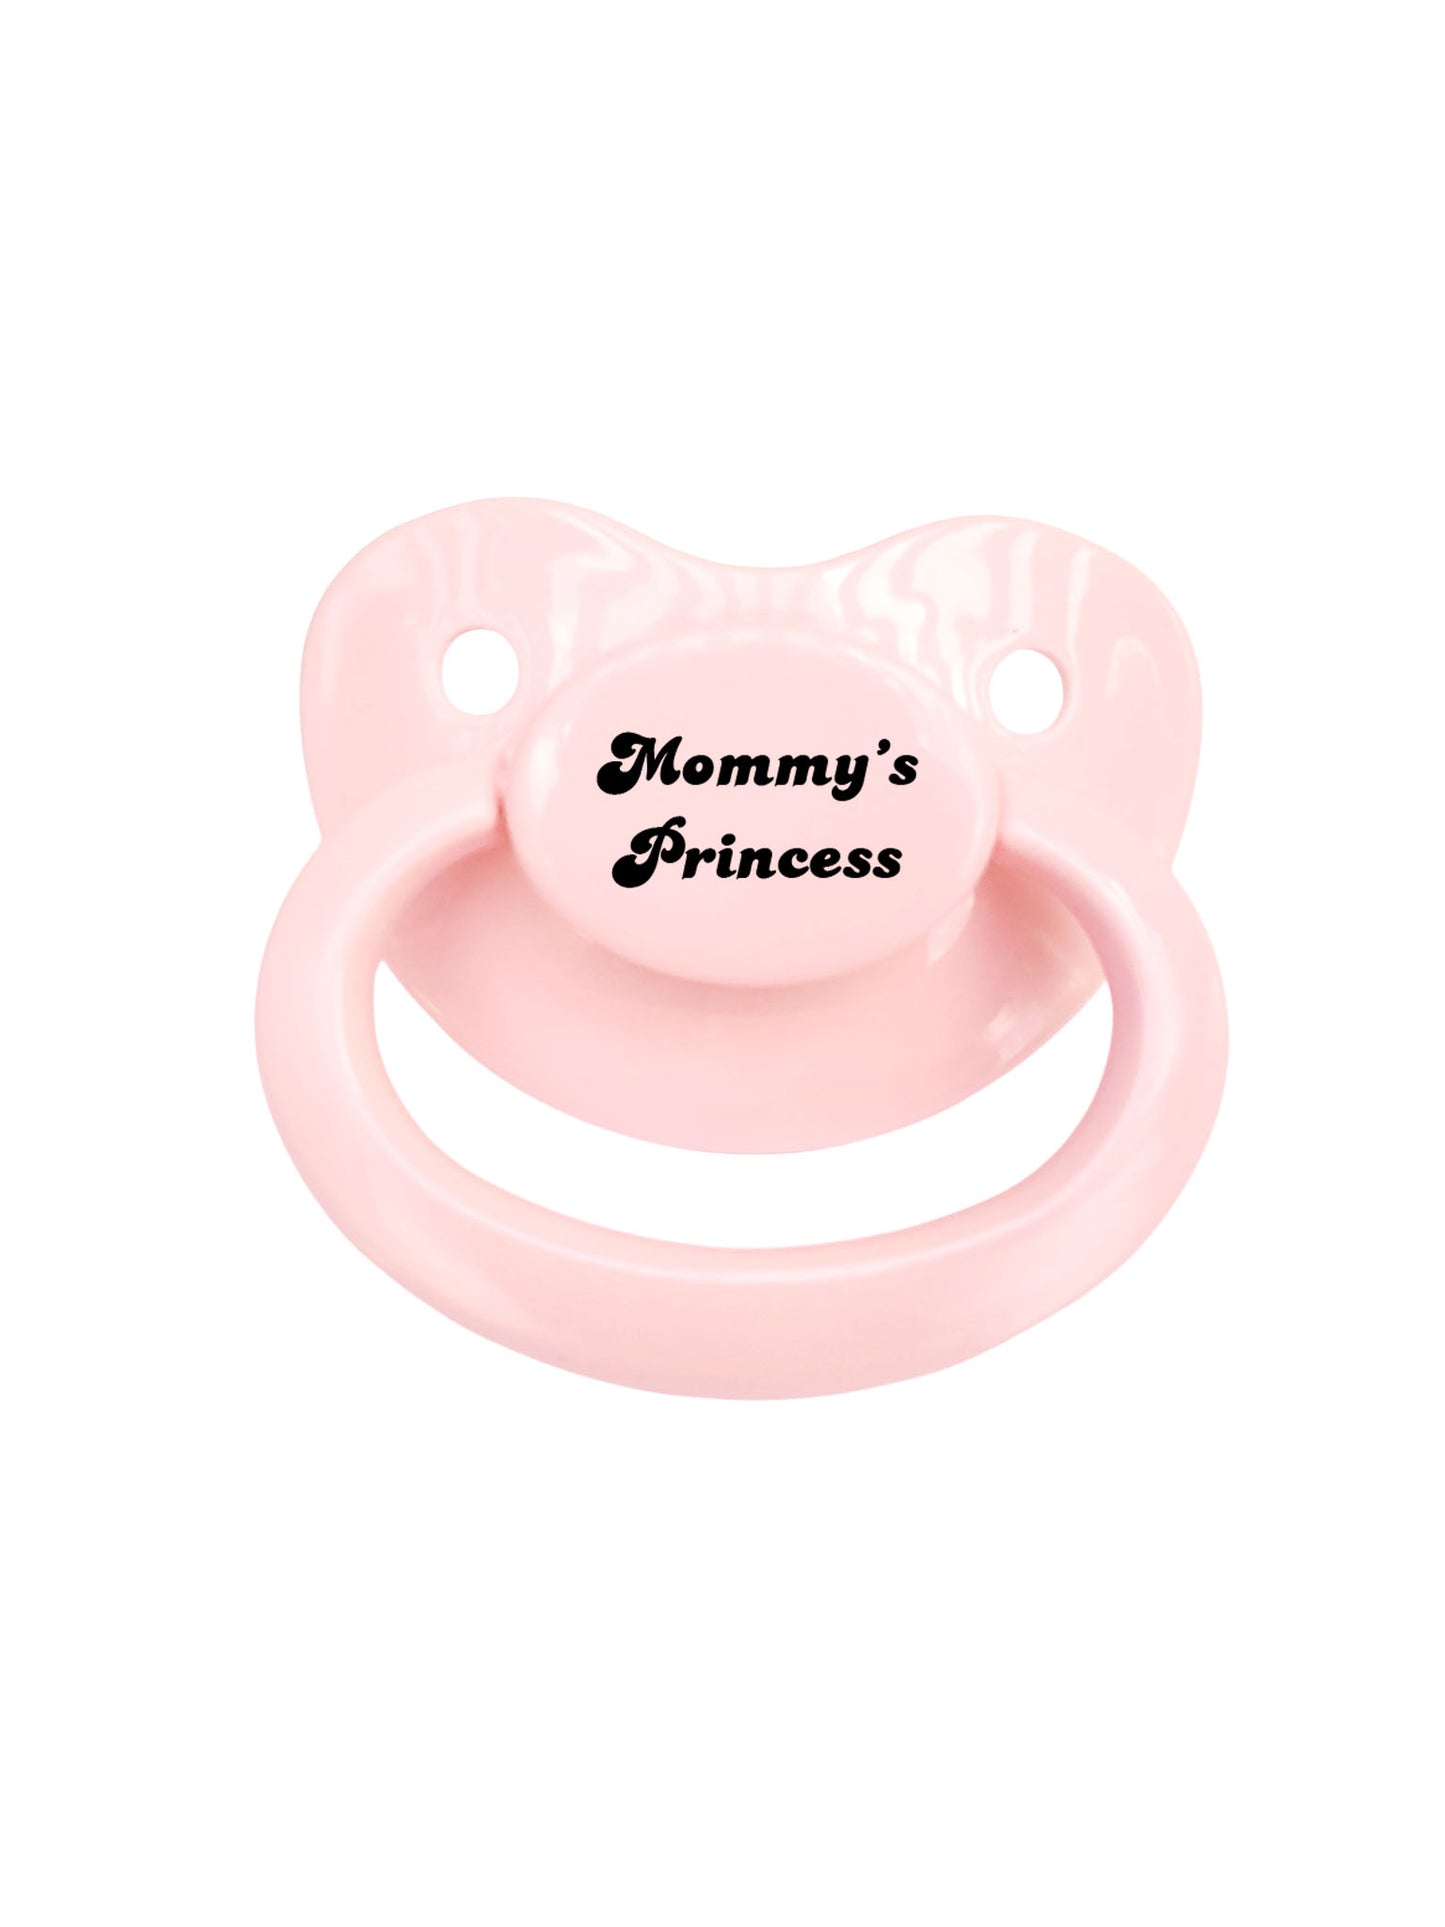 Mommy's Princess Adult Pacifier